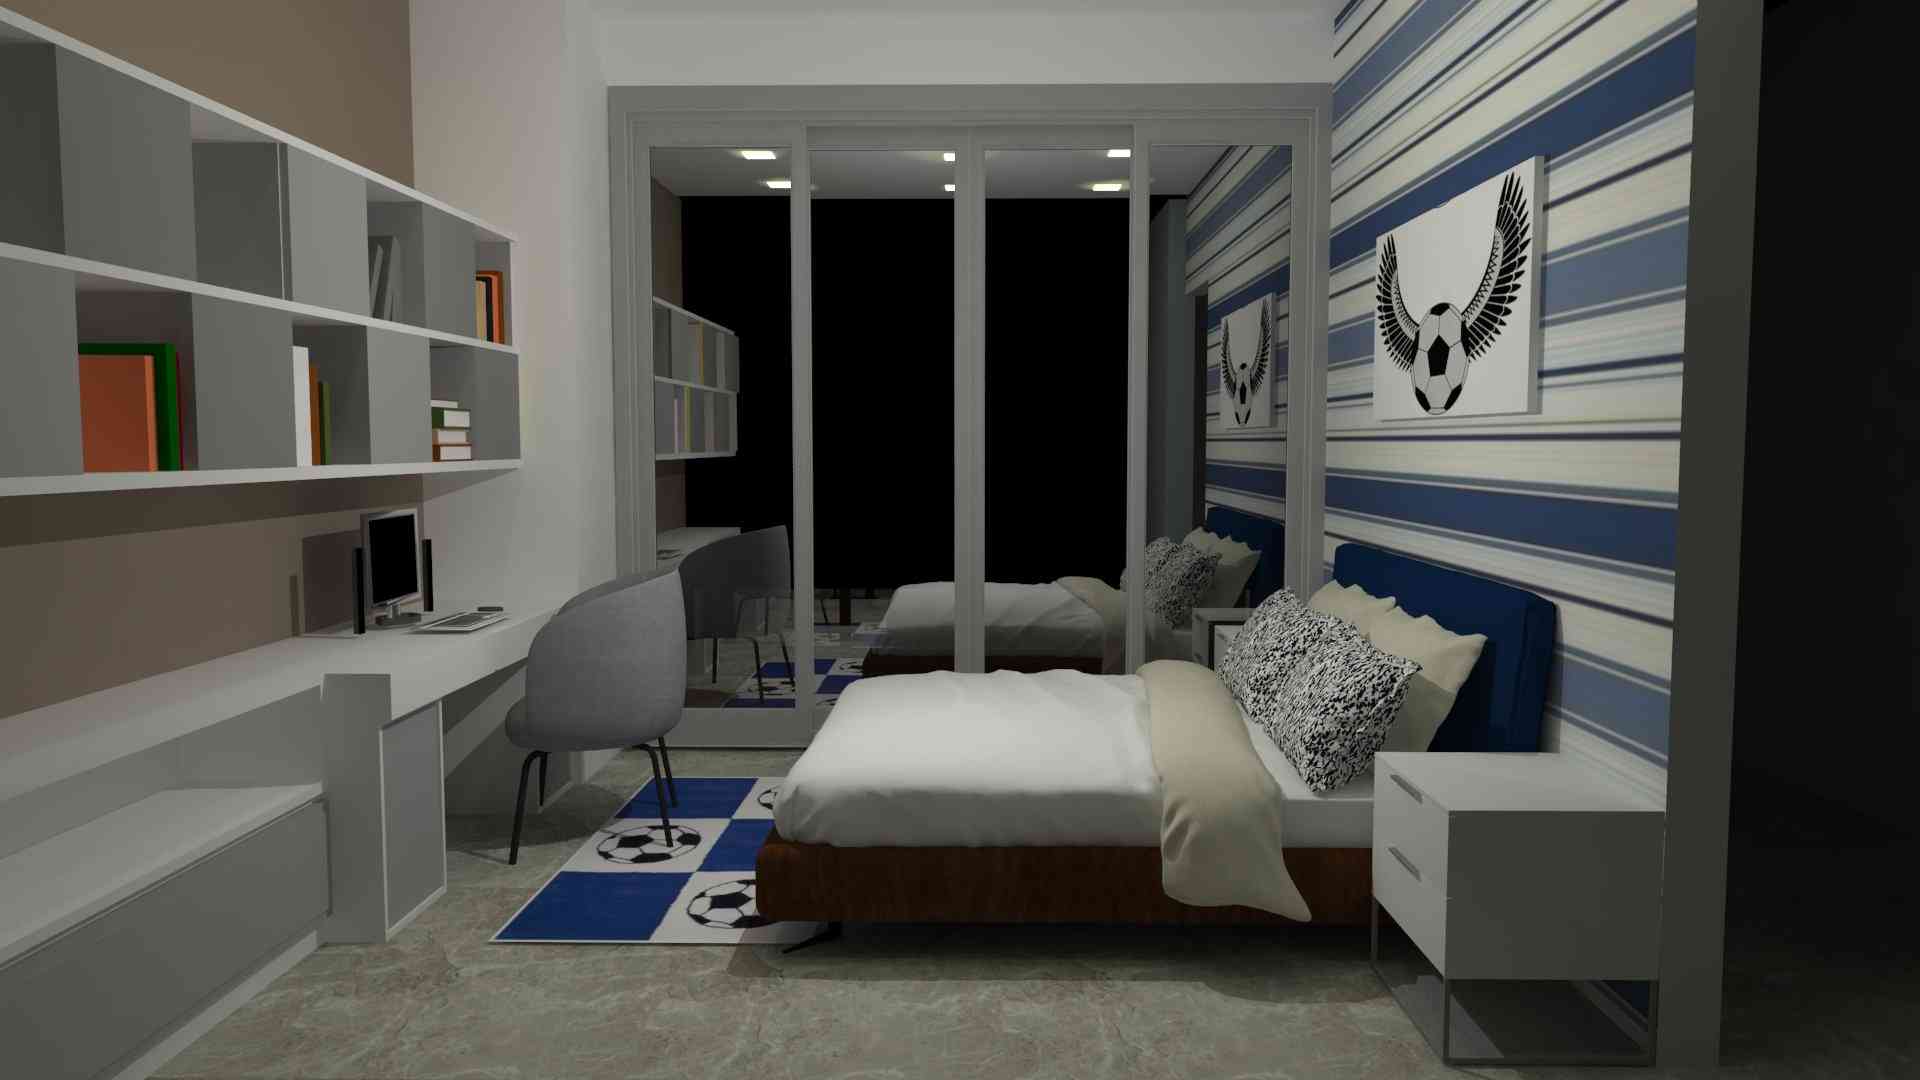 Modern Bedroom With Furniture And Wallpaper, Balcony View